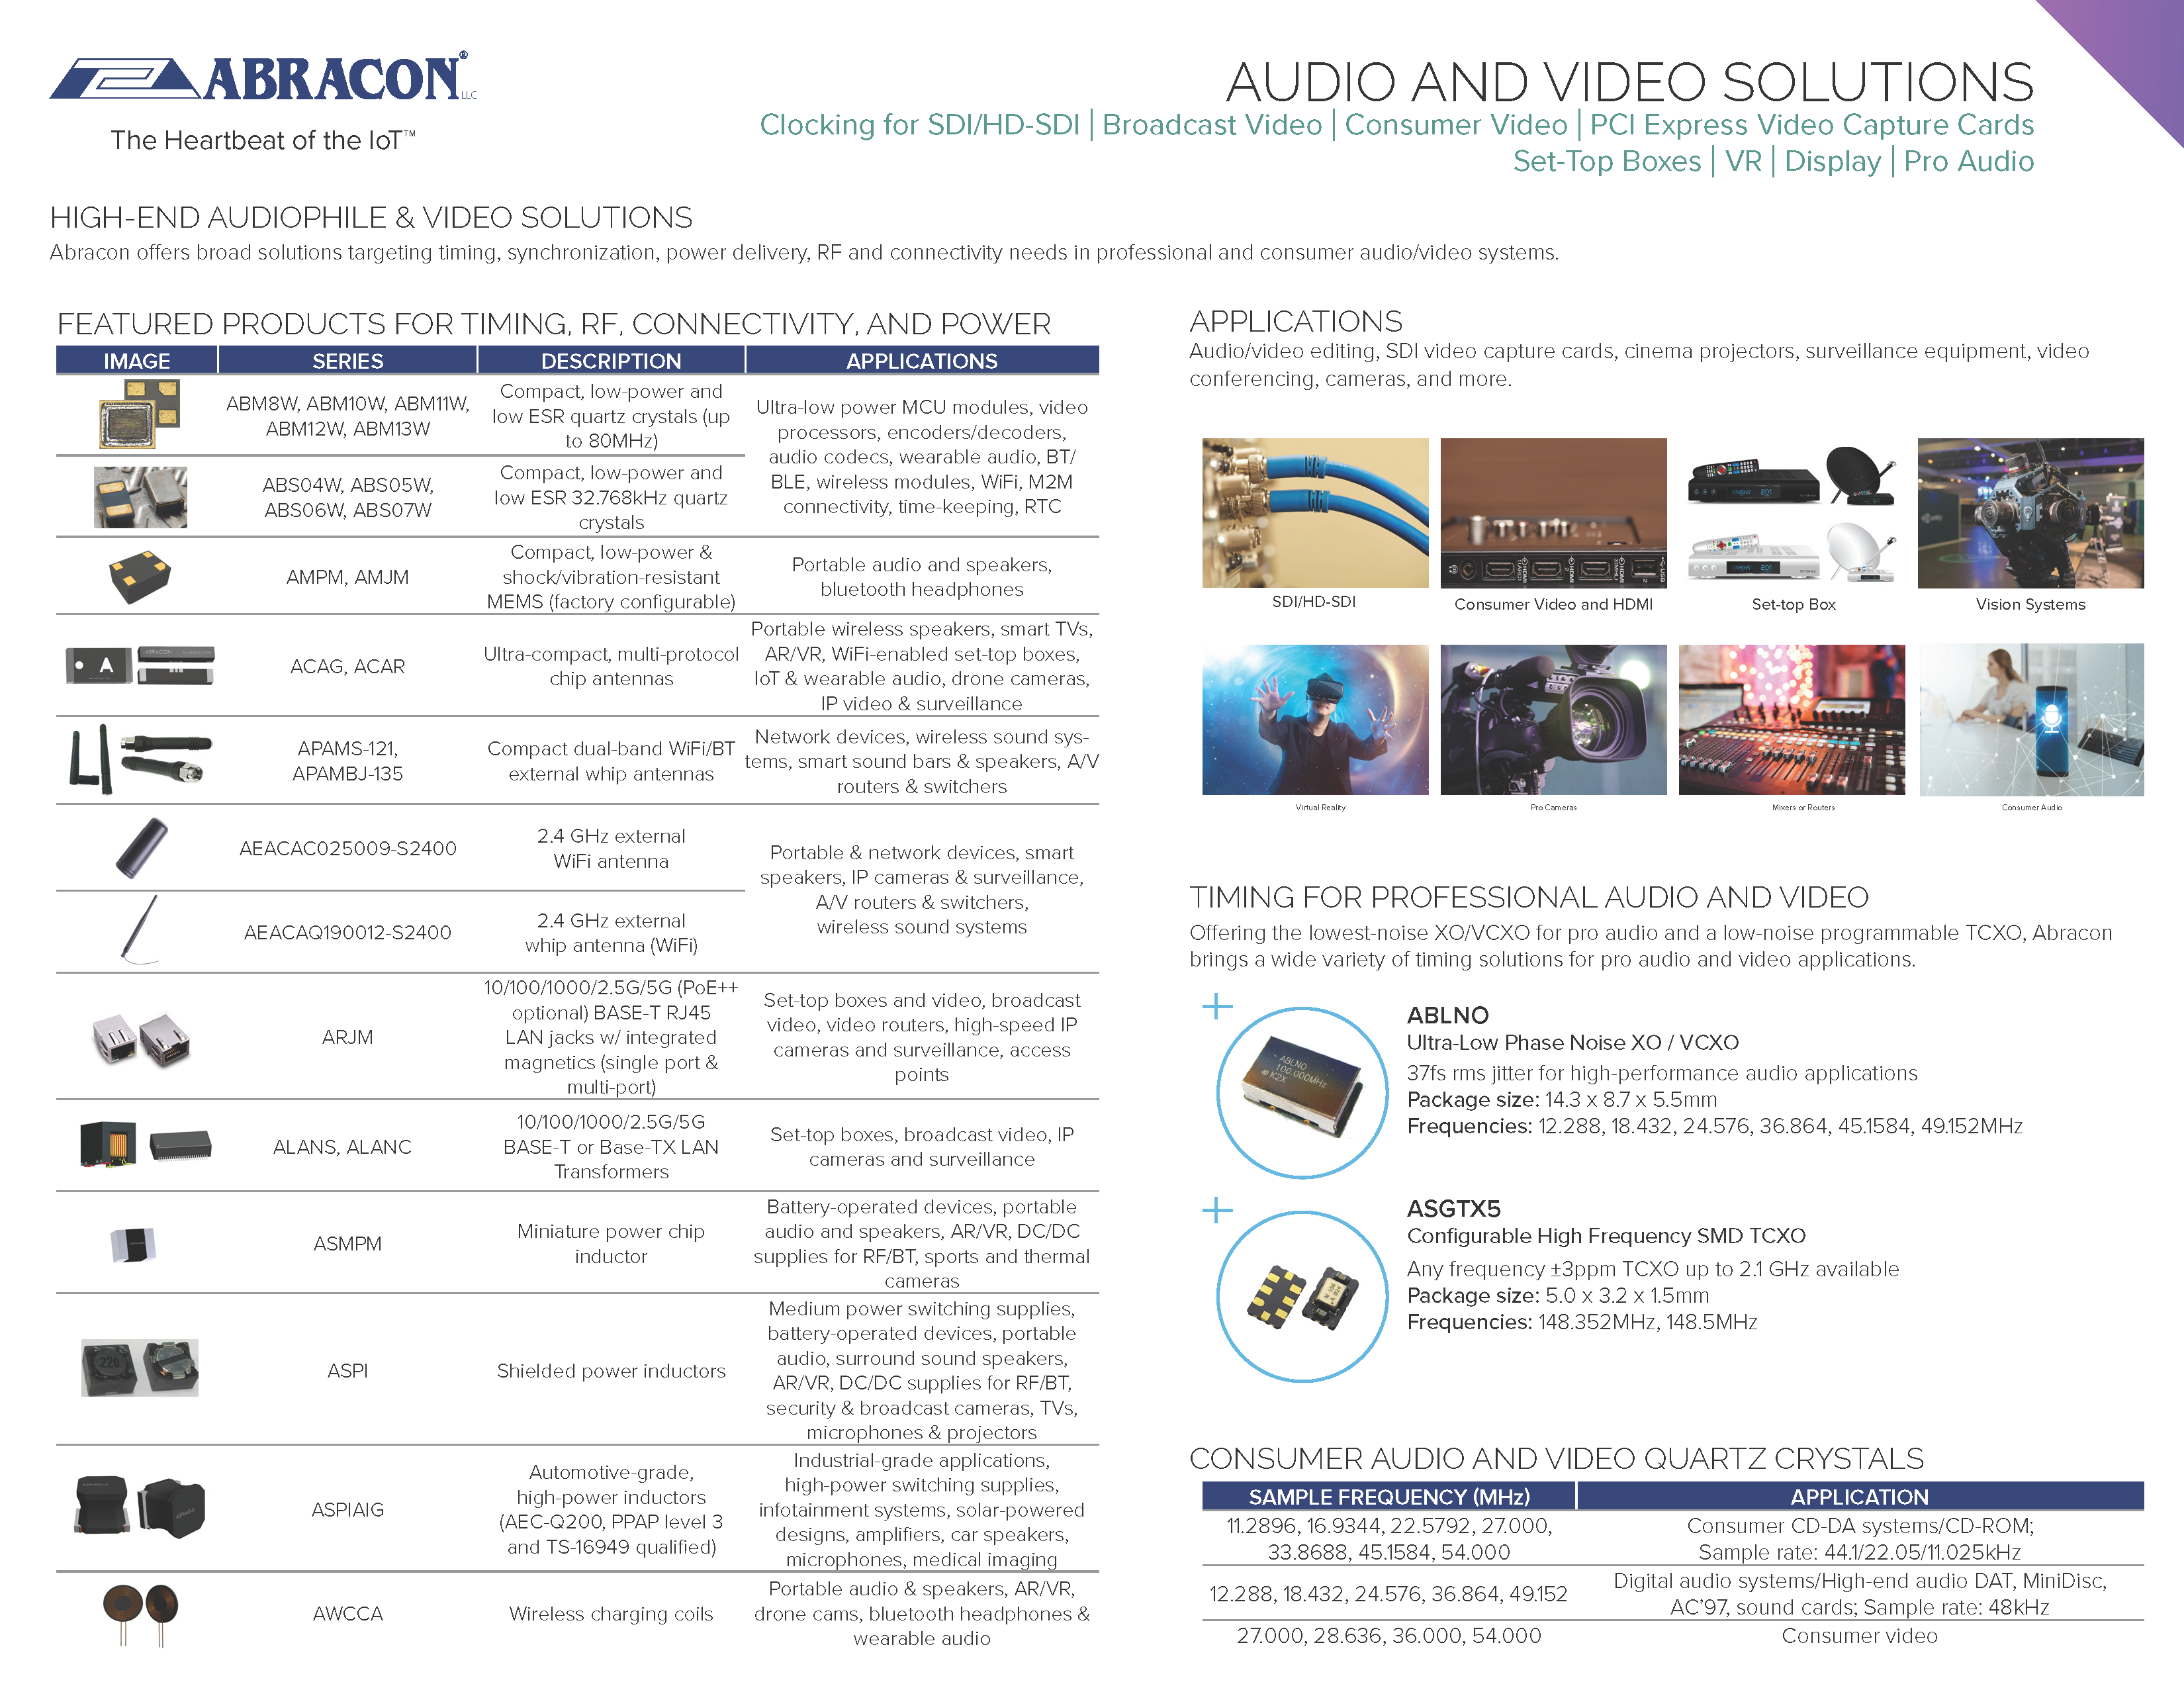 Abracon Audio and Video Solutions Guide Link